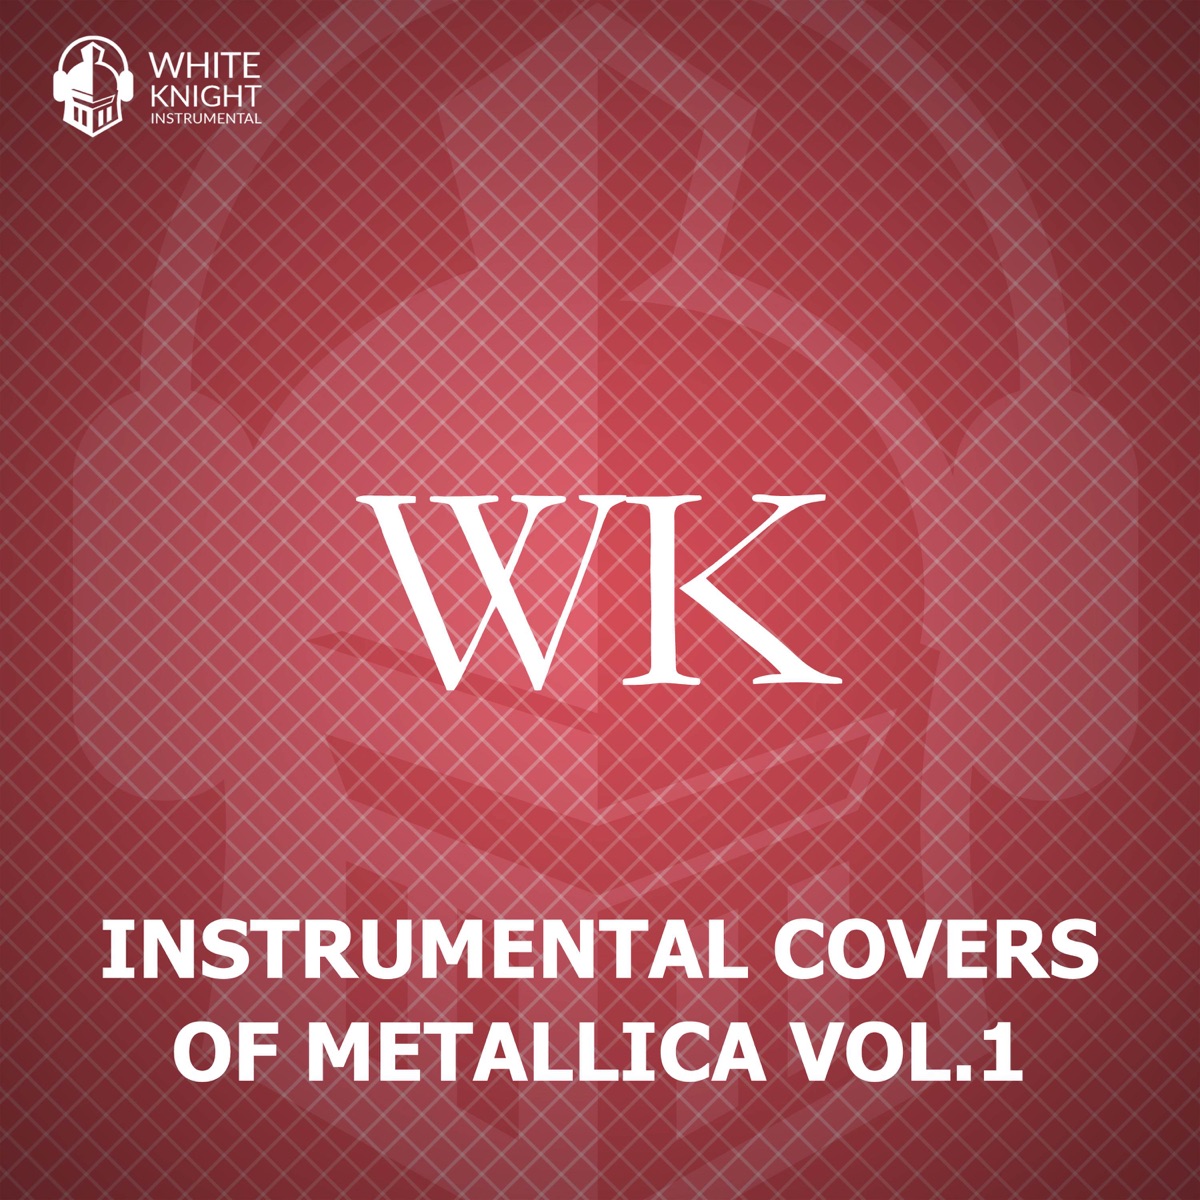 Instrumental Covers of Metallica, Vol. 1 by White Knight Instrumental on  Apple Music